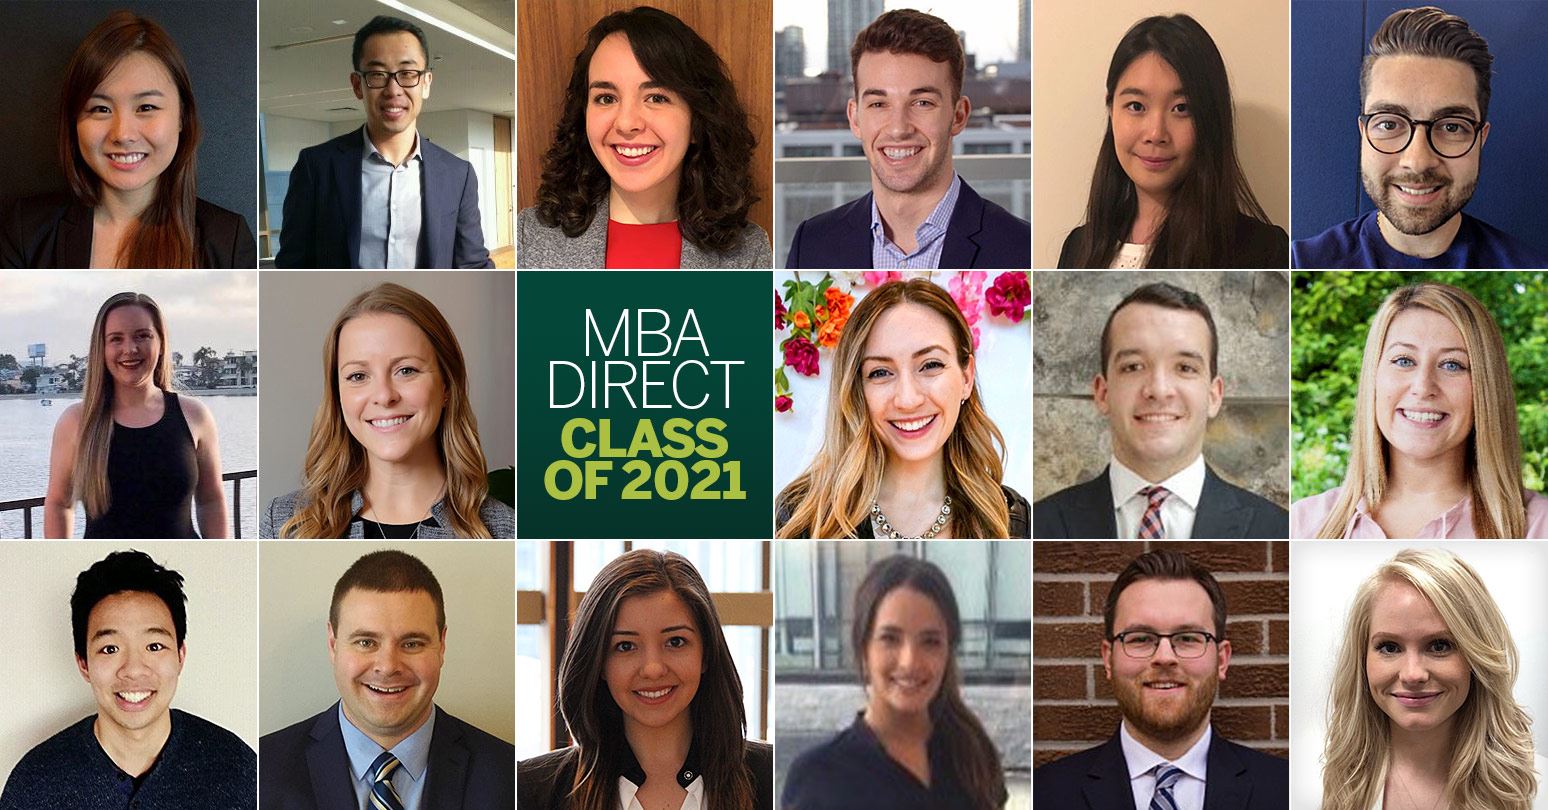 Welcome to the MBA Direct Class of 2021